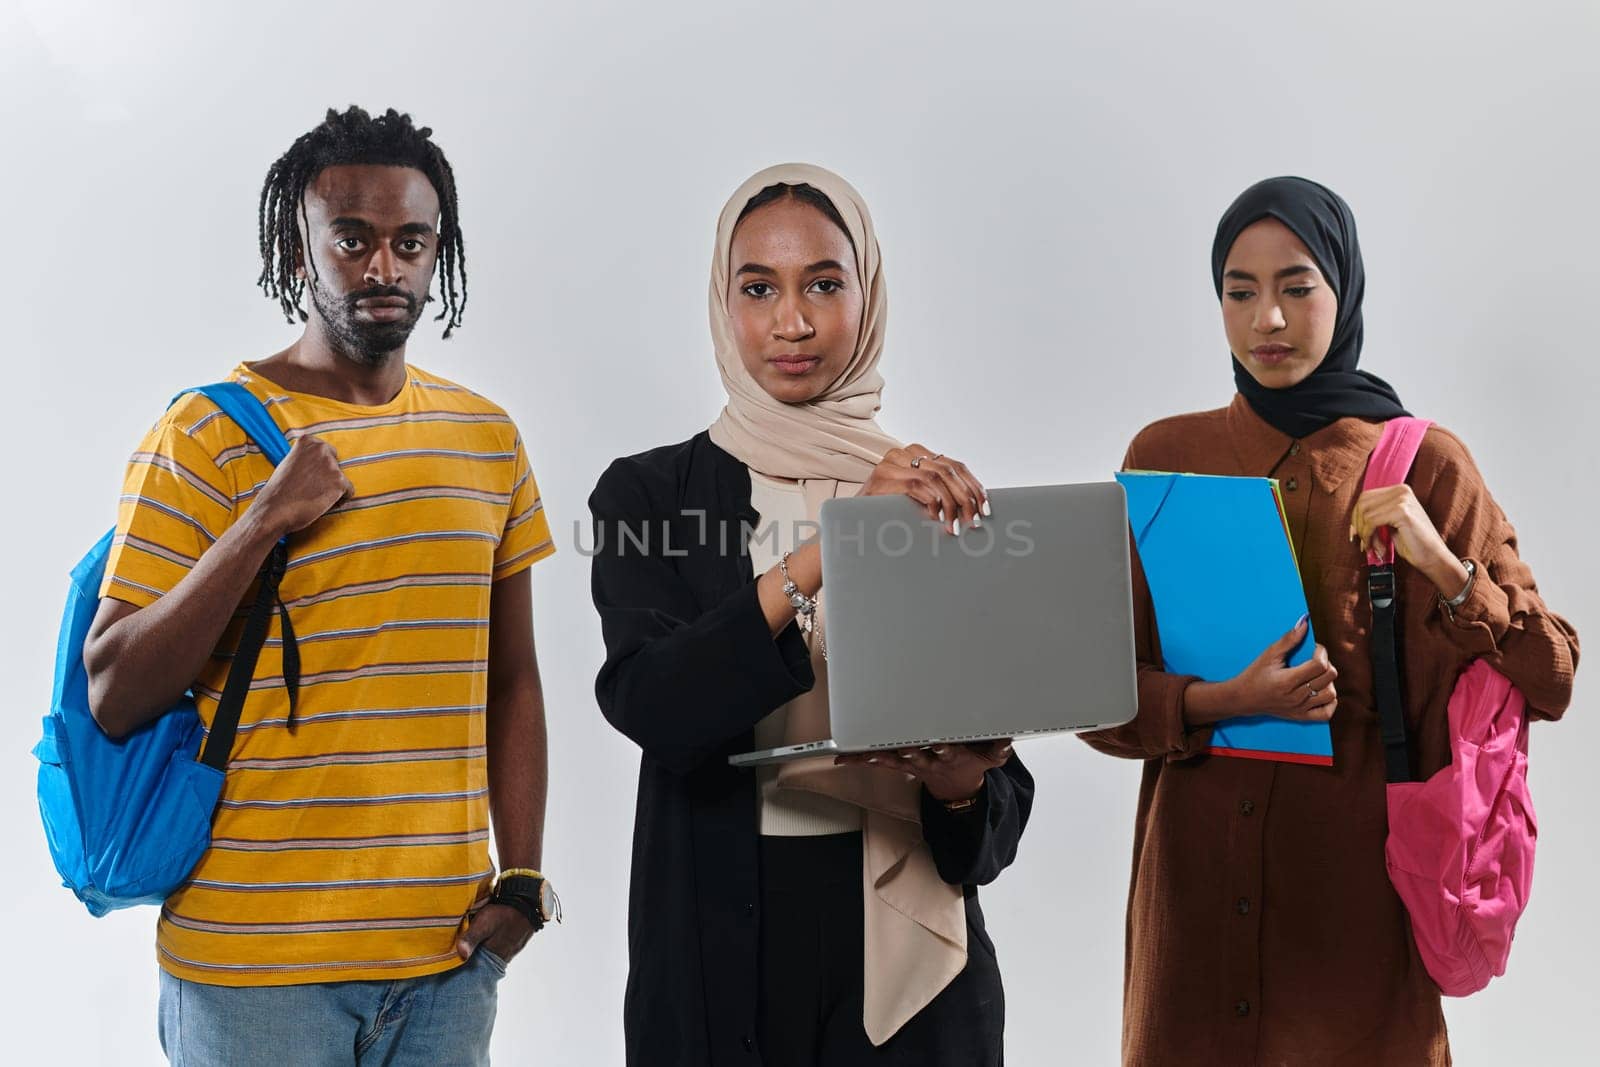 A group of students, including an African American student and two hijab-wearing women, stand united against a pristine white background, symbolizing a harmonious blend of cultures and backgrounds in the pursuit of knowledge and academic excellence.